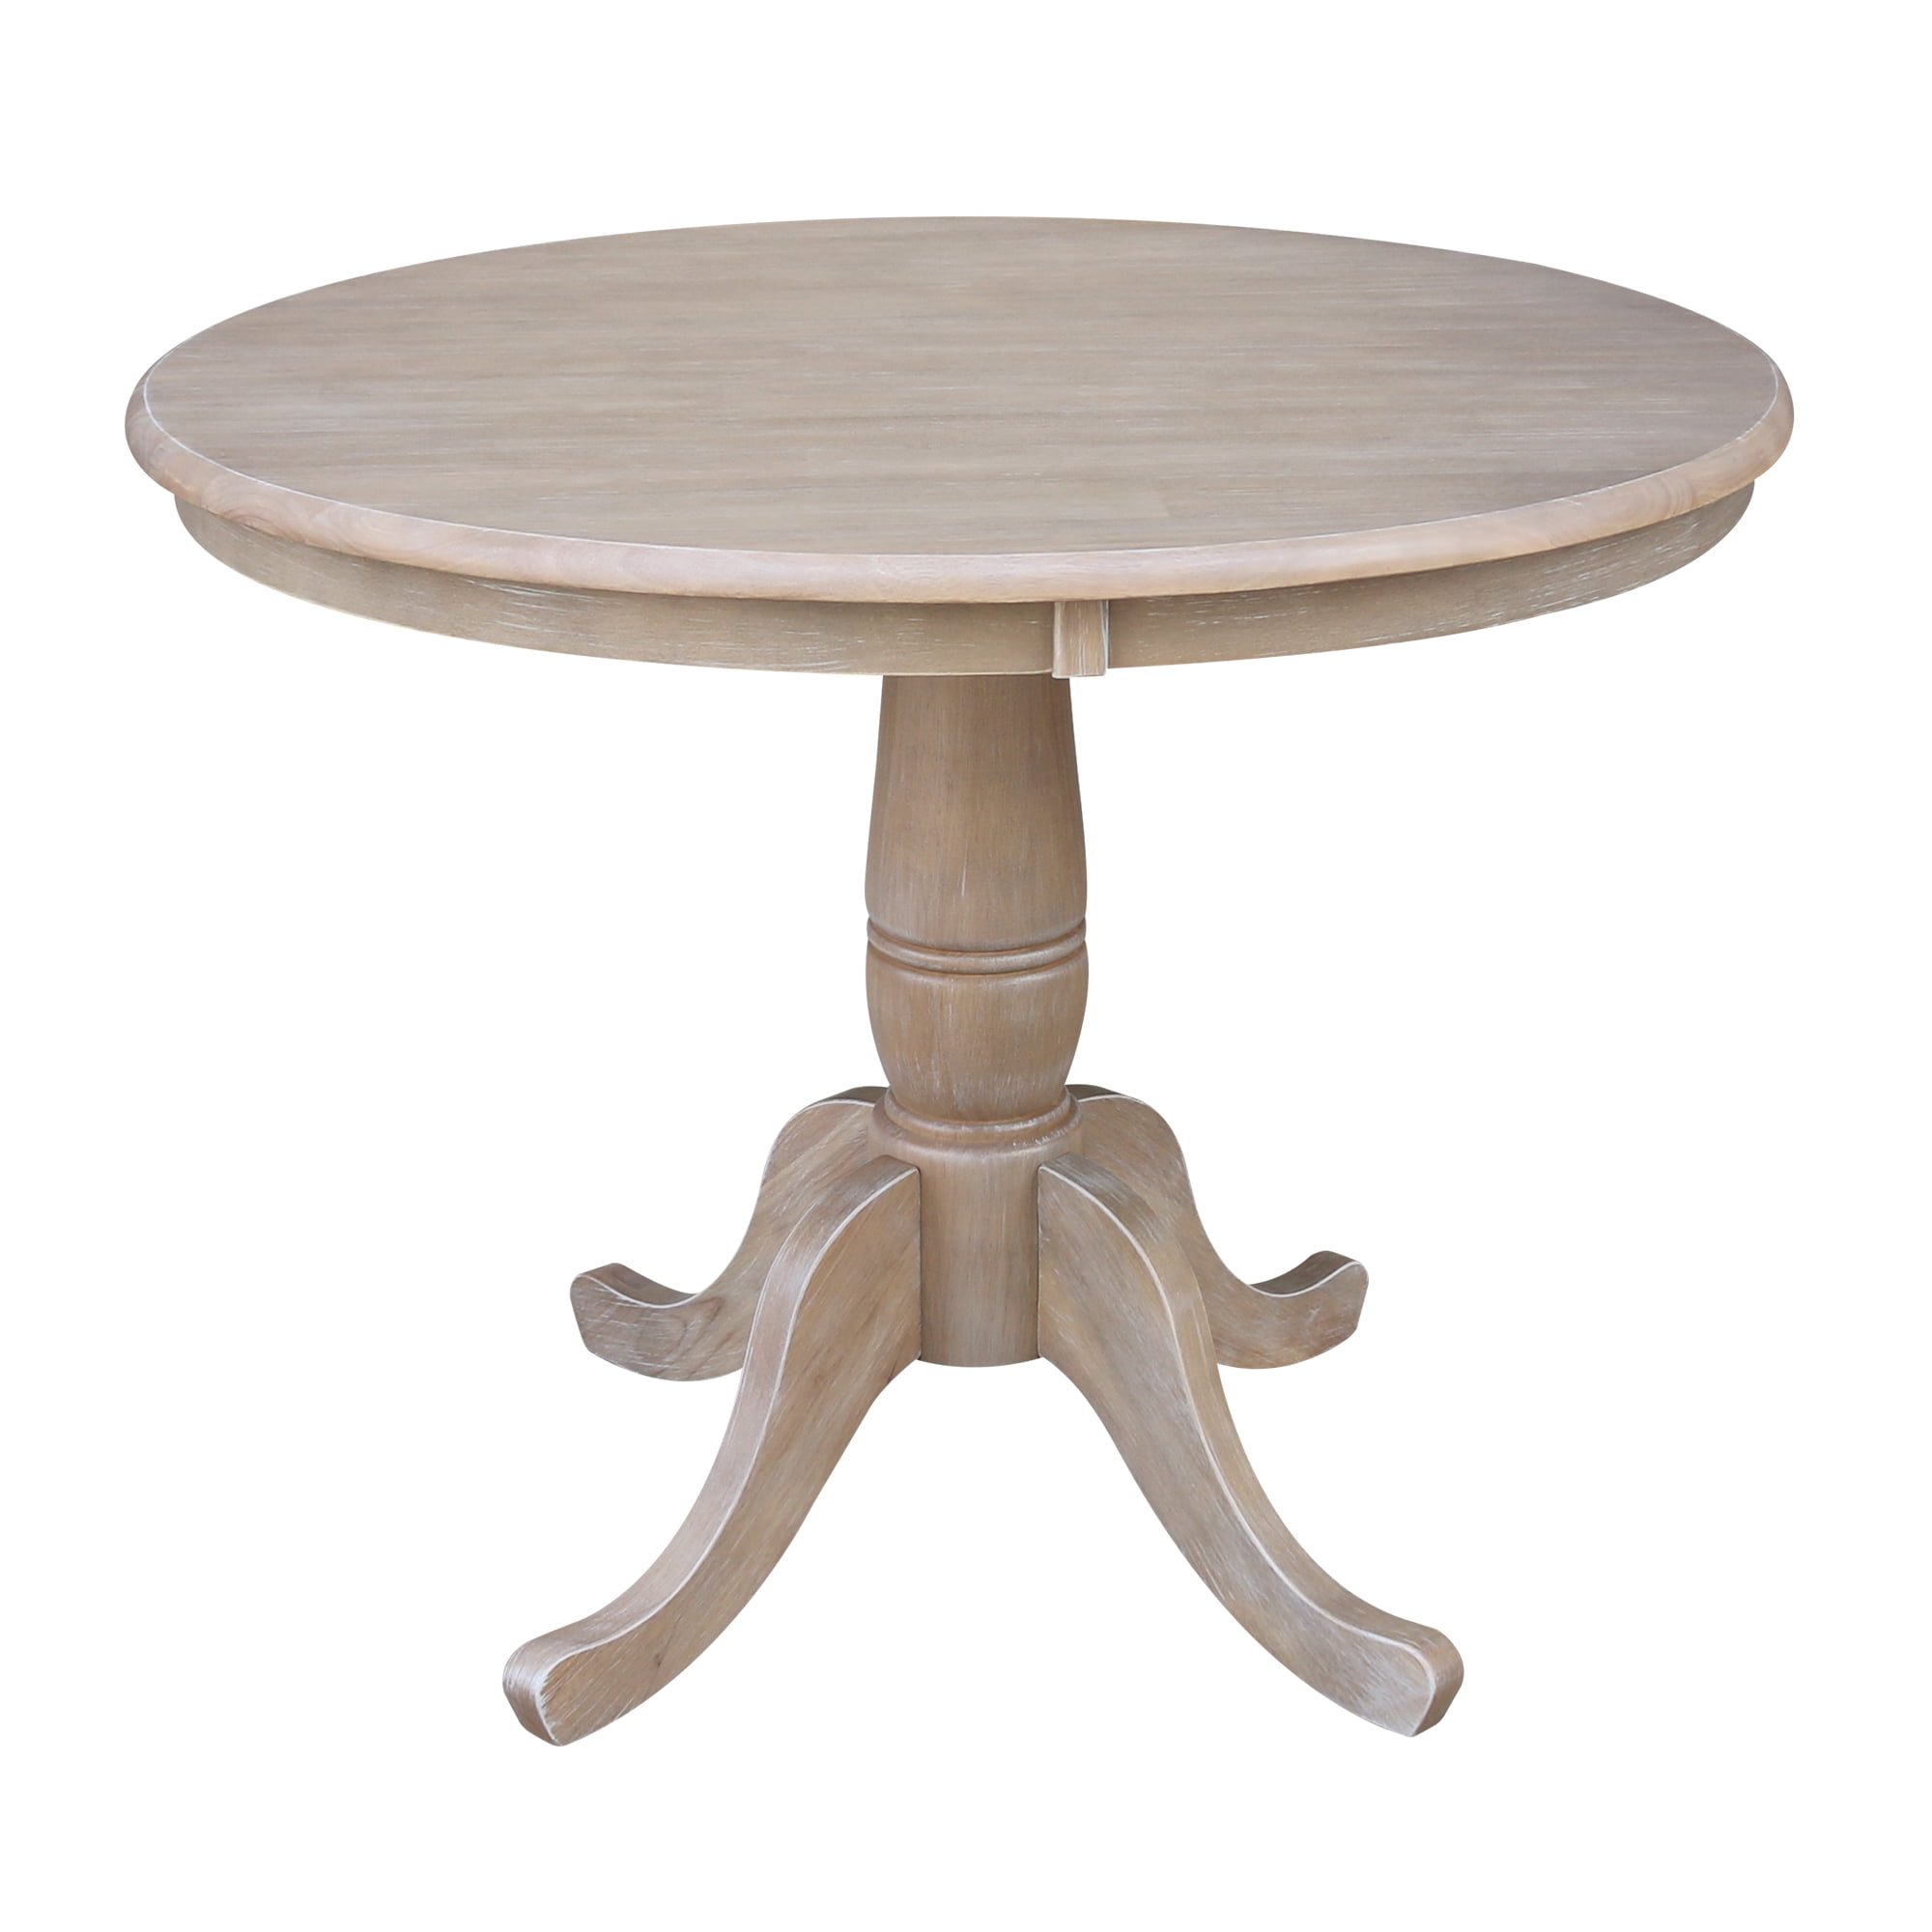 Solid Wood 36" x 36" Round Pedestal Dining Table in Washed Gray Taupe